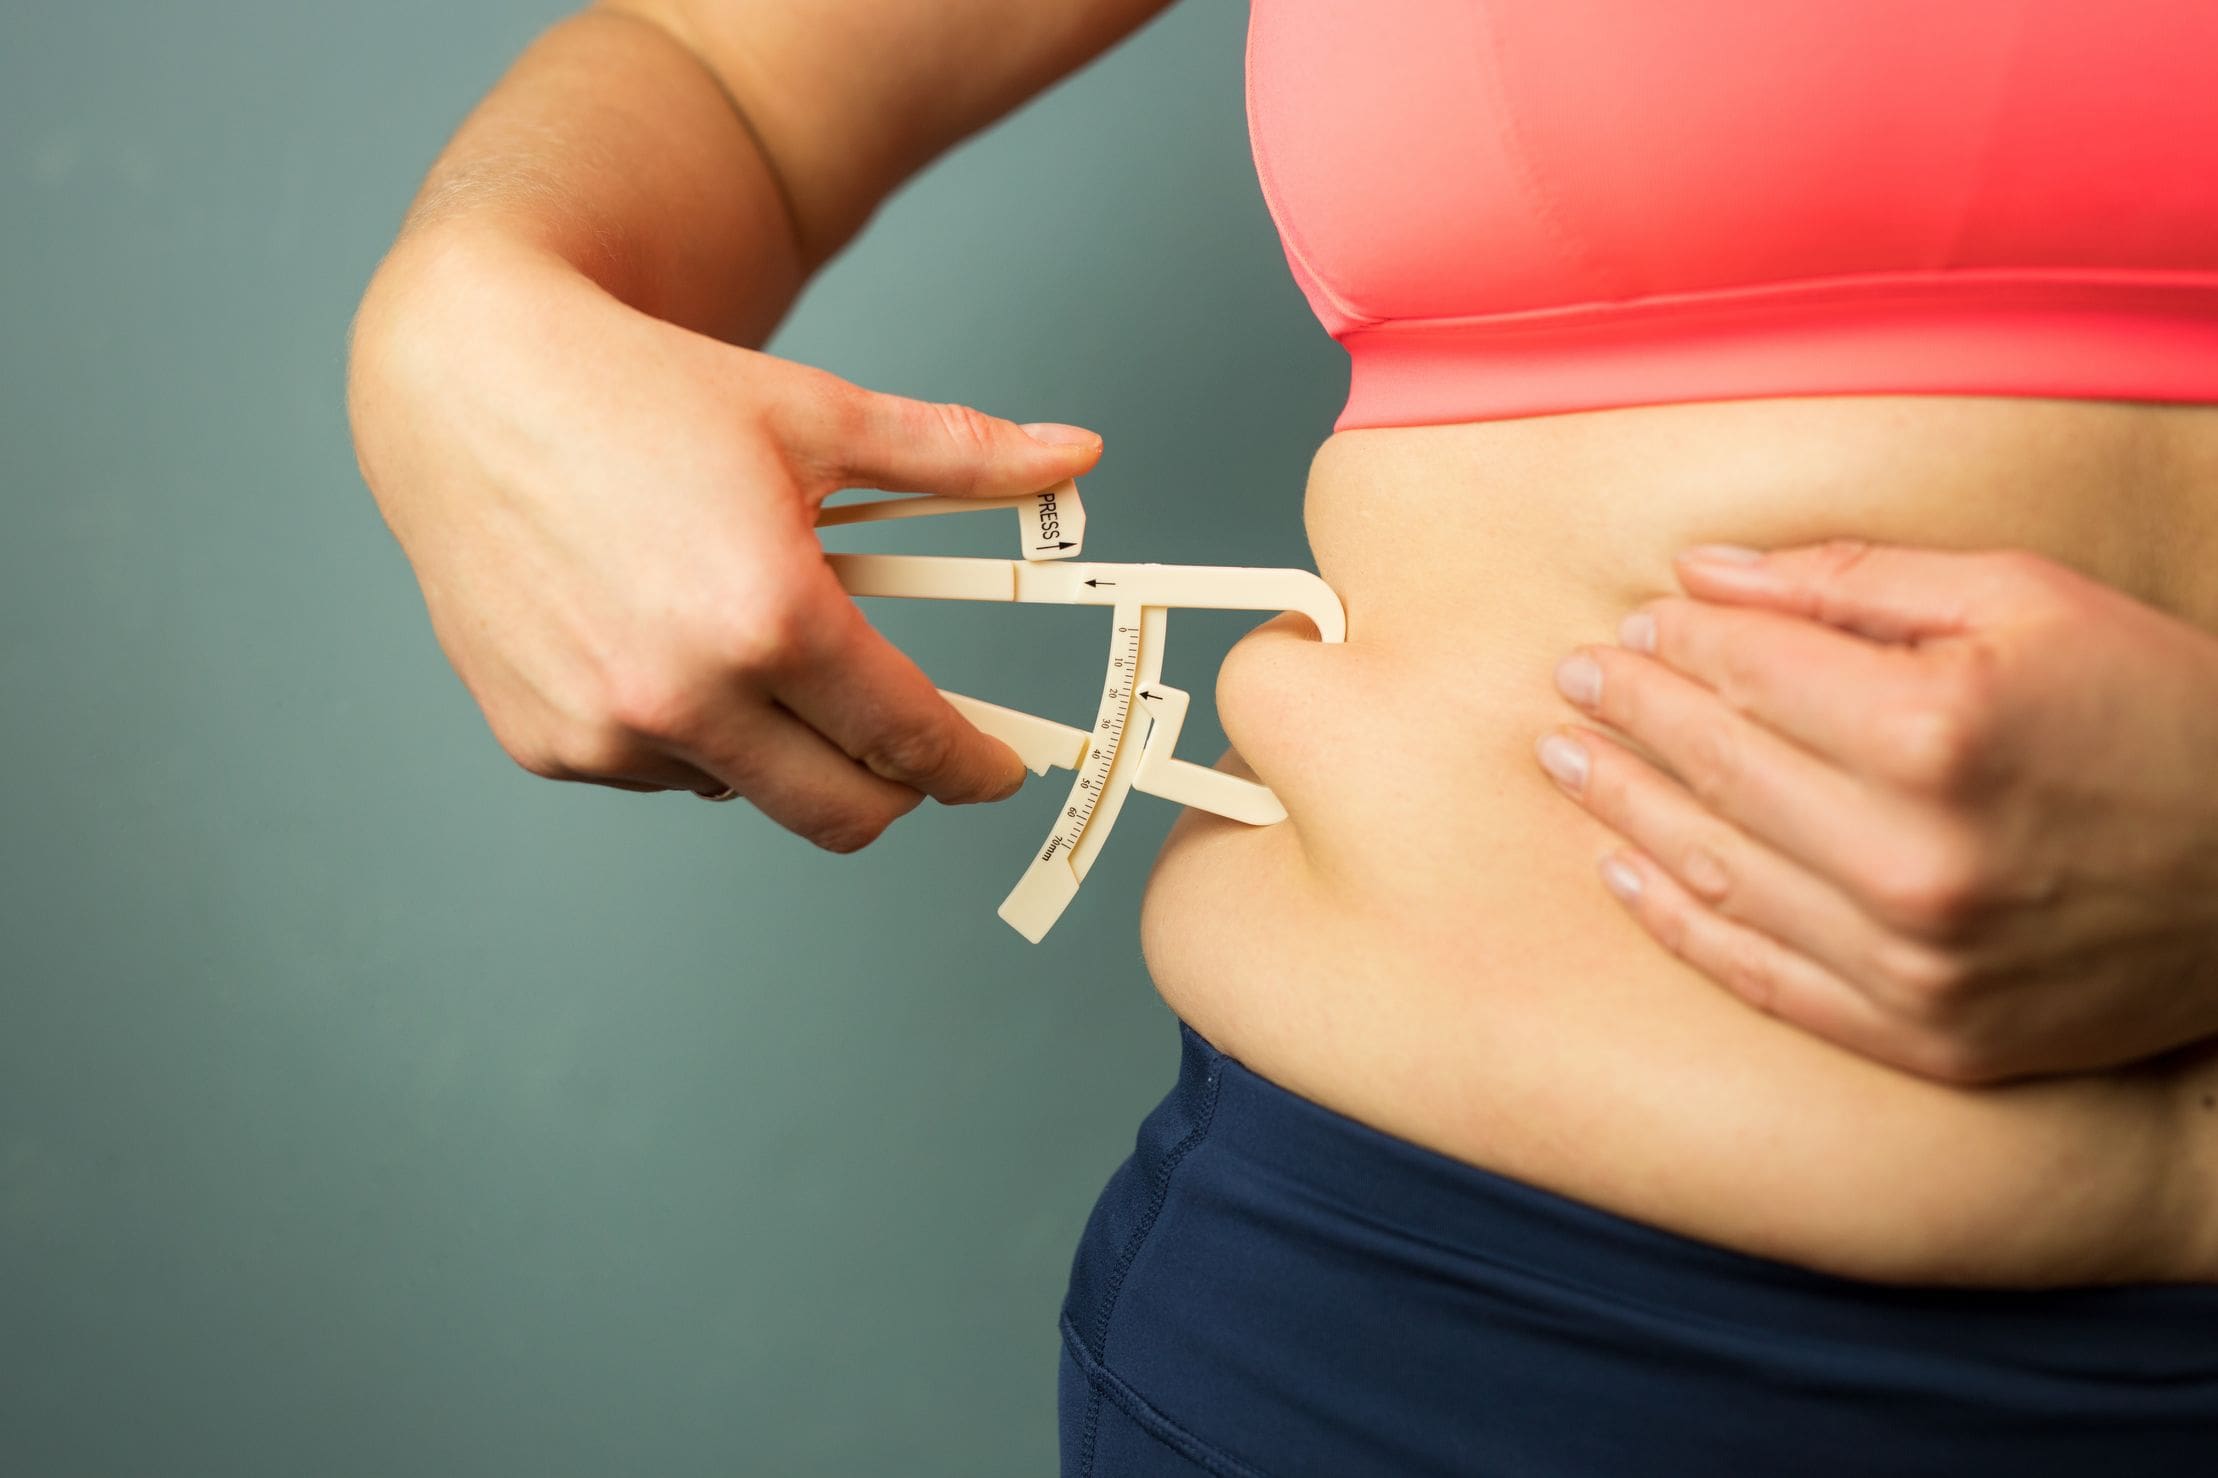 Does duration of obesity up cancer risk in women?